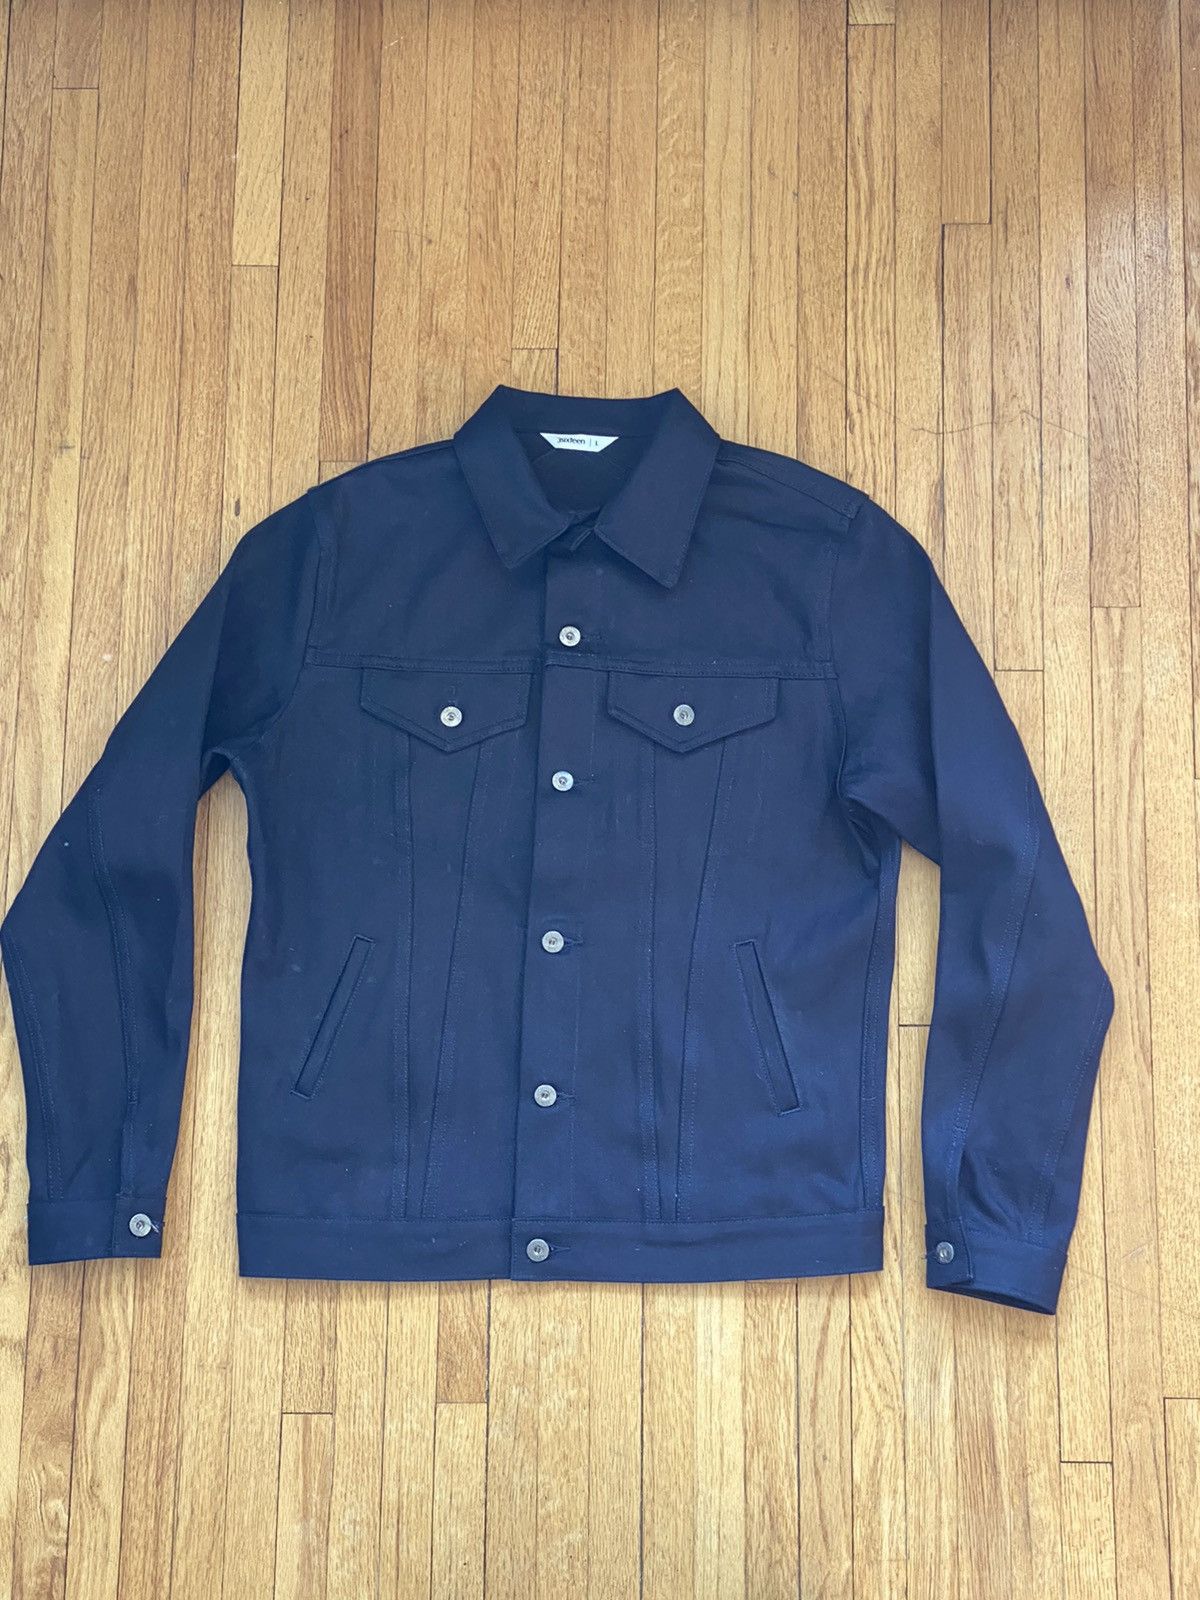 3sixteen Modified Type-3 Denim Jacket in Shadow Selvedge Size US L / EU 52-54 / 3 - 1 Preview